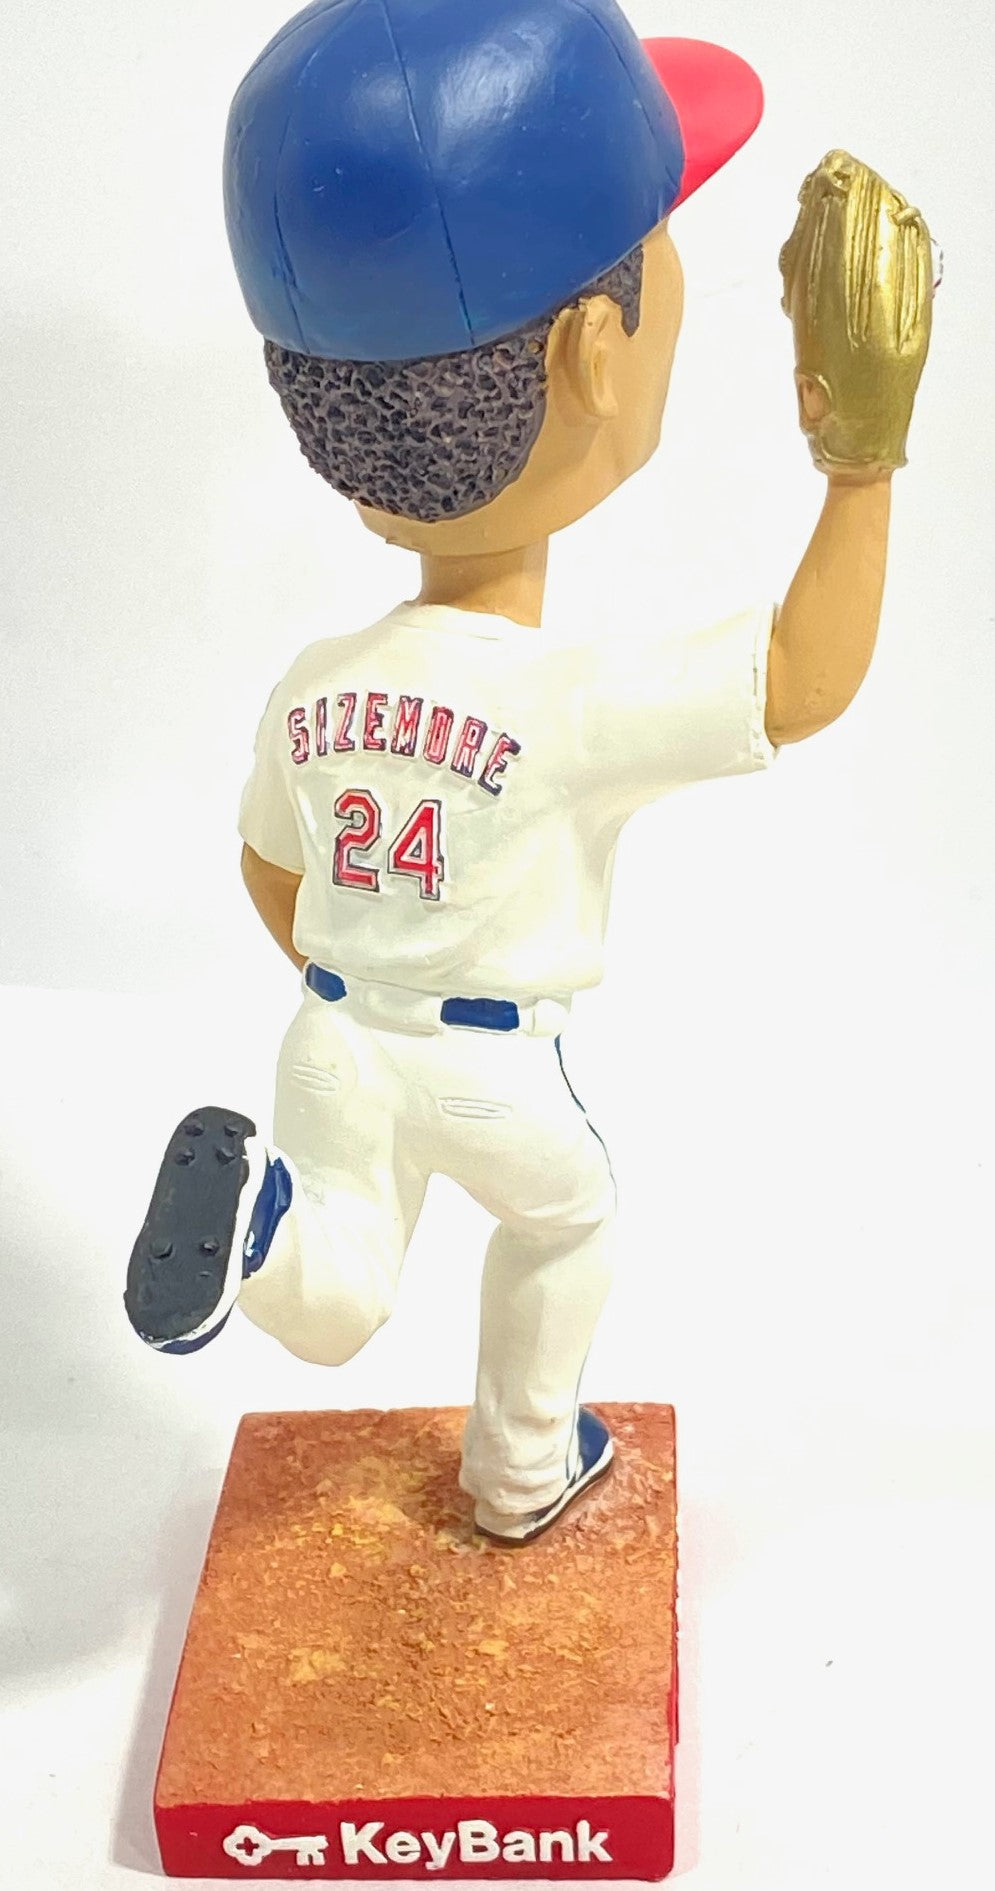 Grady Sizemore 2007 MLB Cleveland Indians Gold Glove Mini-Bobblehead (Used) By BD&A